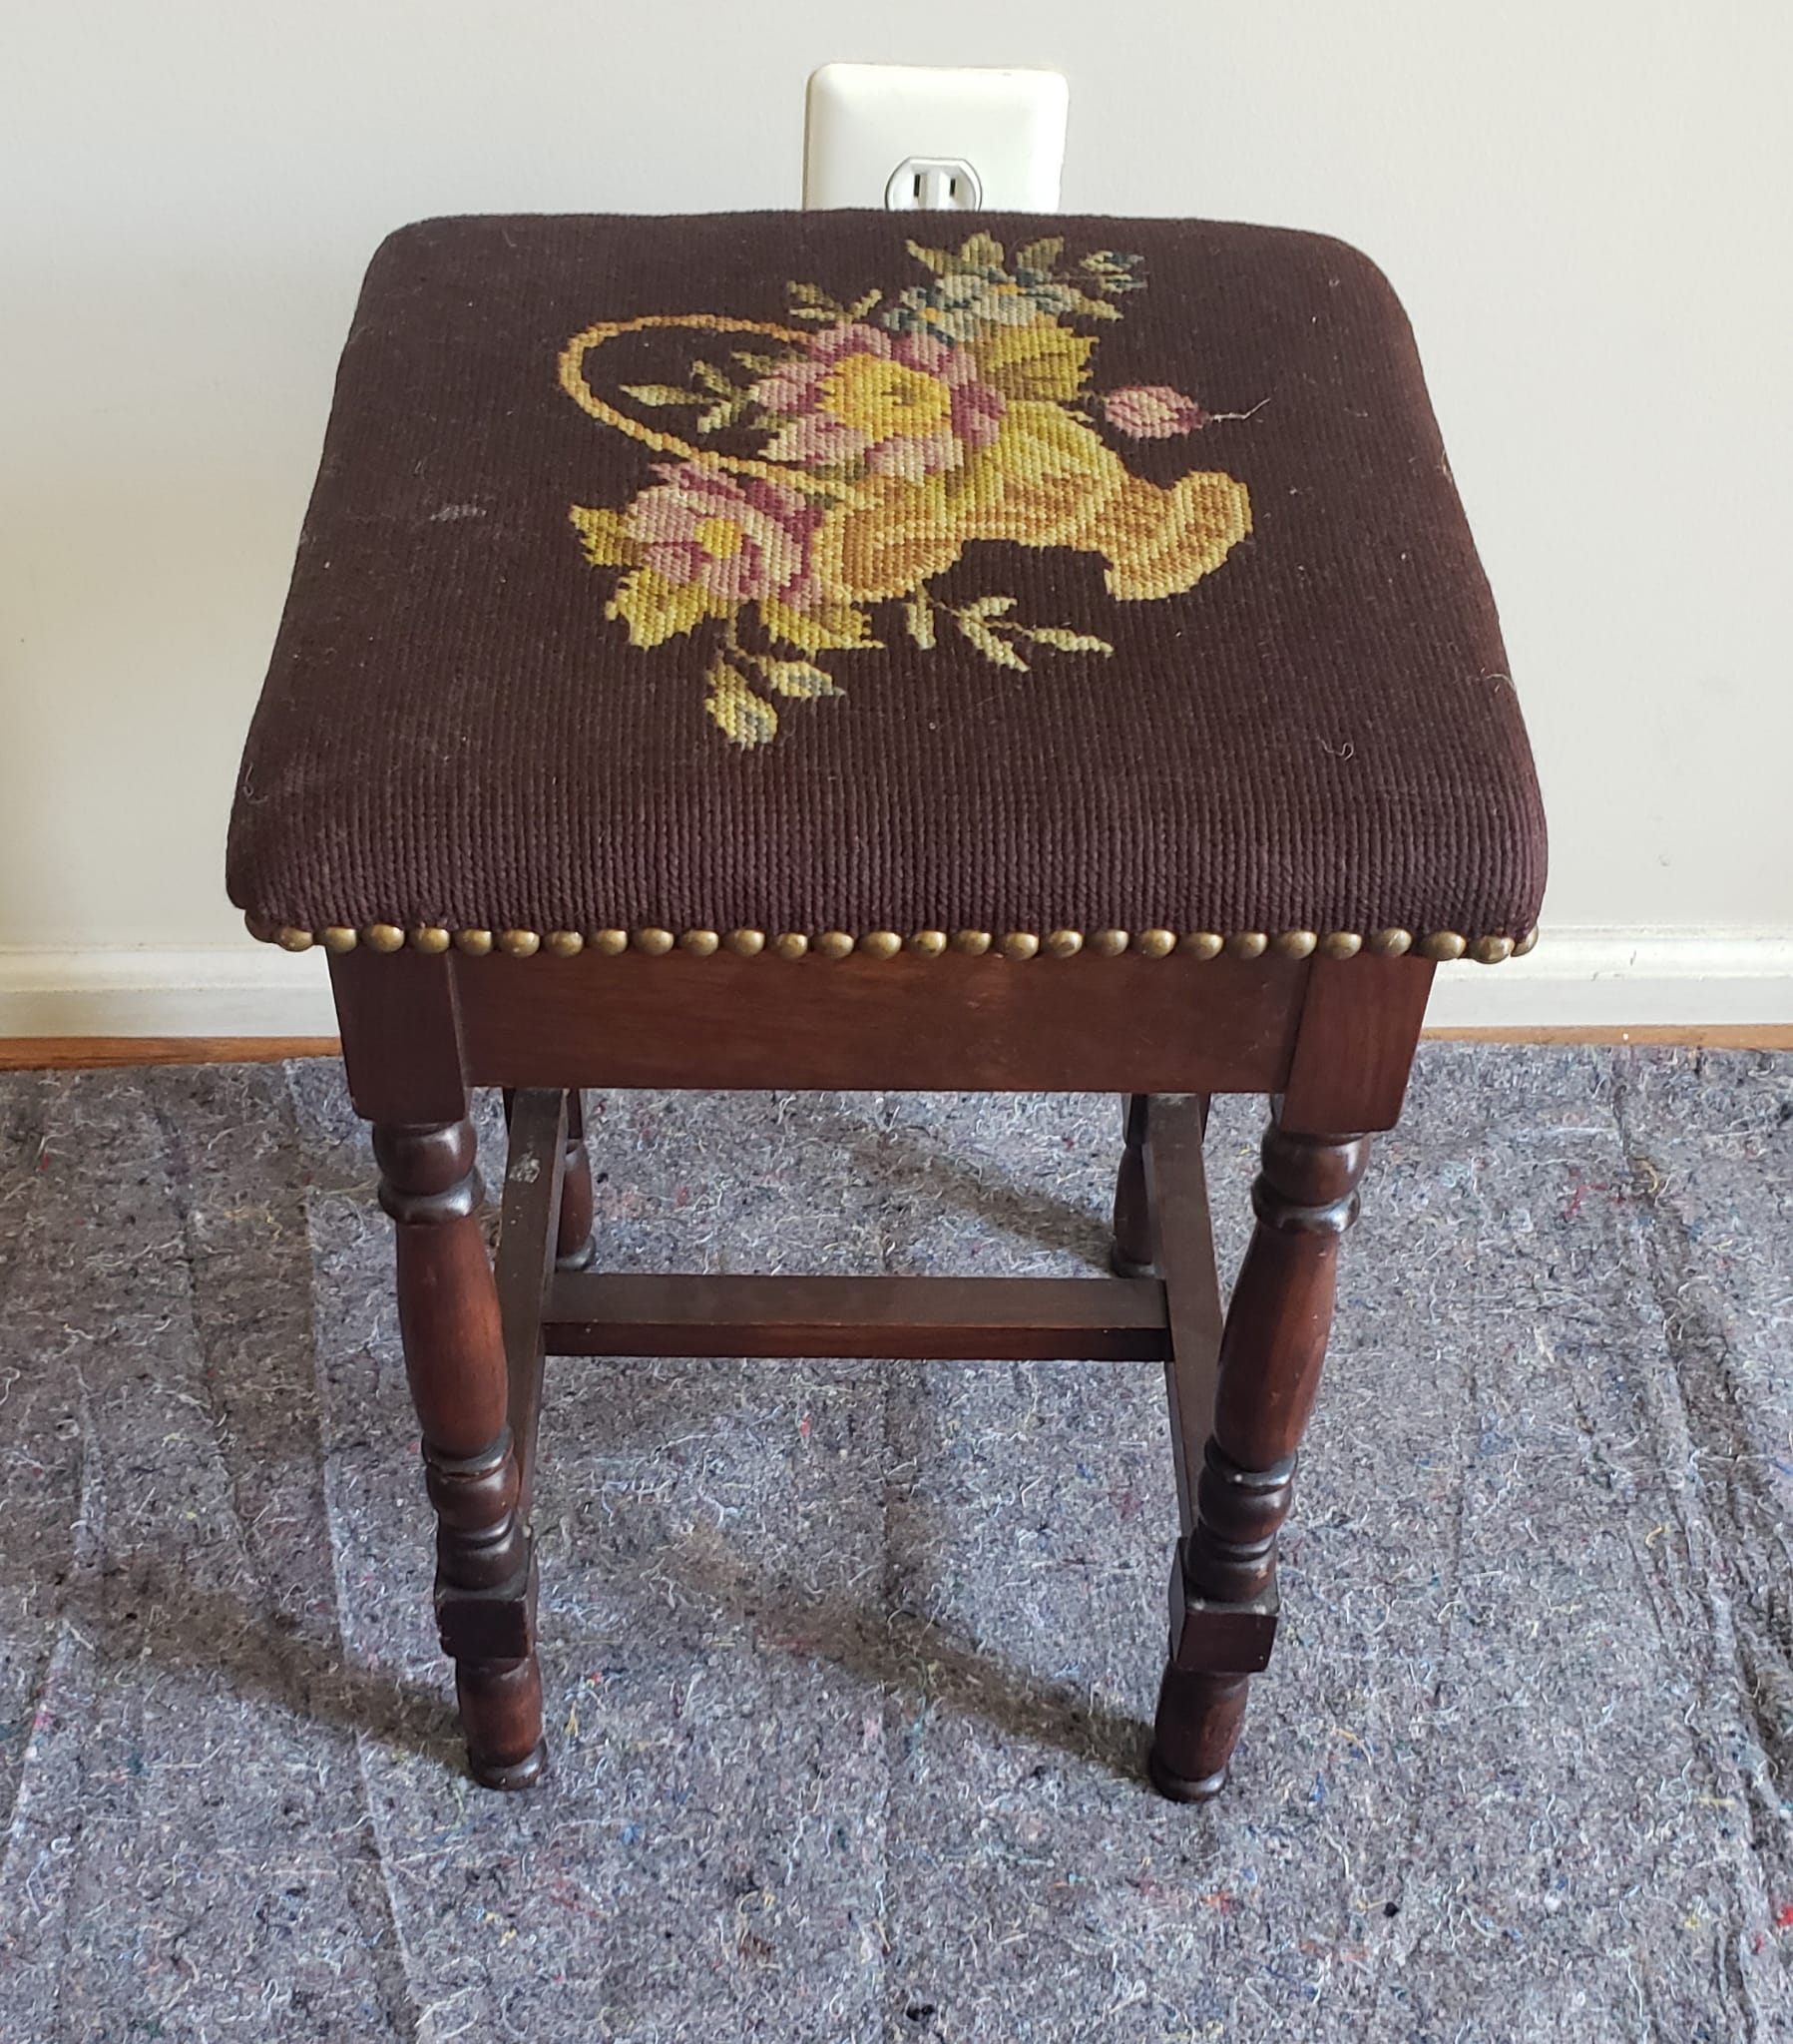 20th Century Mahogany and Upholstered Low Stool with NailHead Trims in great vintage condition.
Measures 12.5